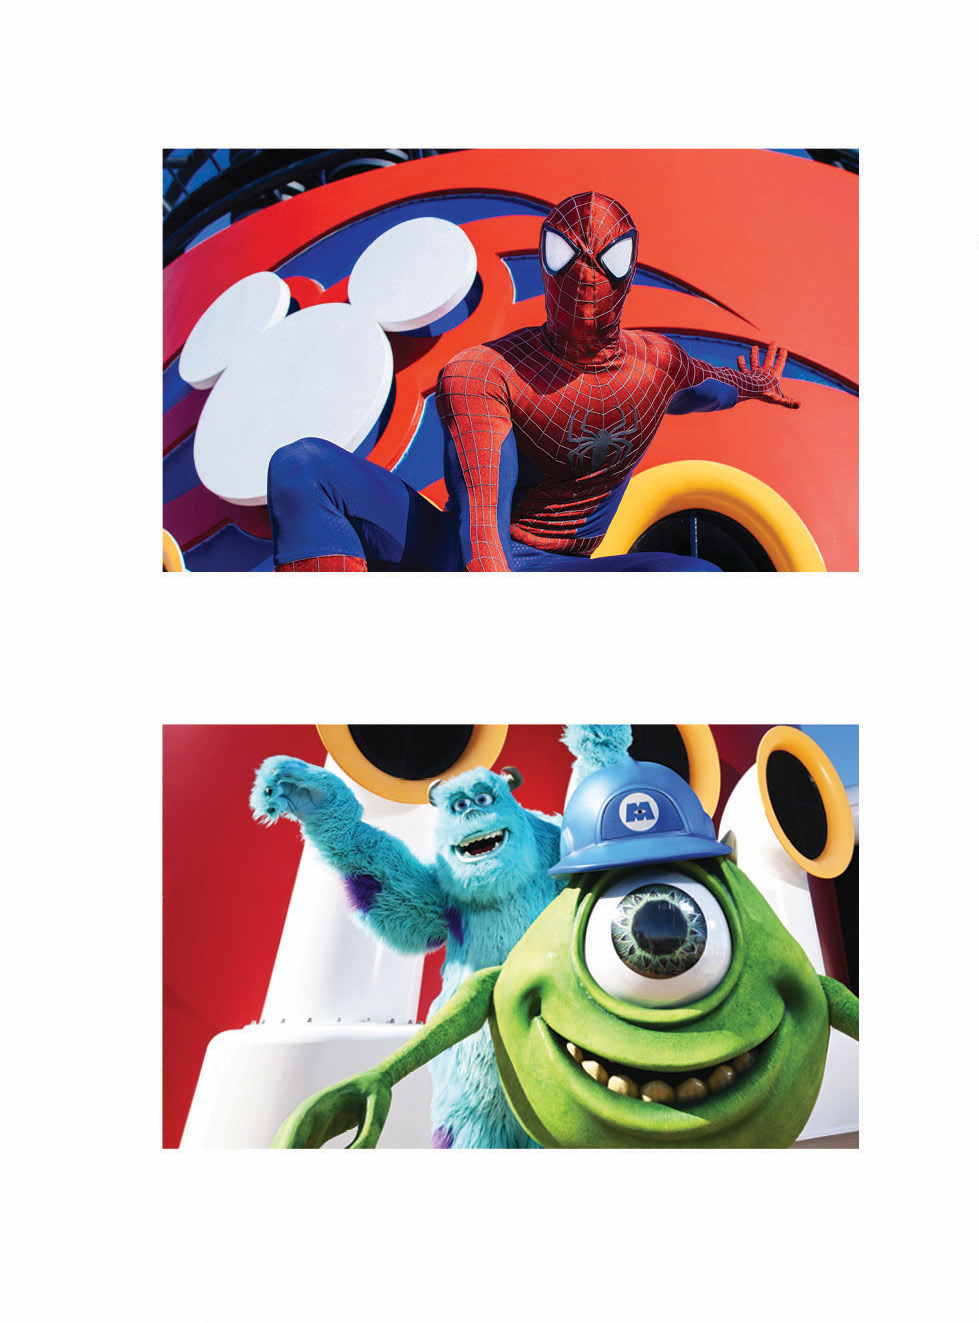 Disney Cruise Line Image with Marvel and Pixar Characters